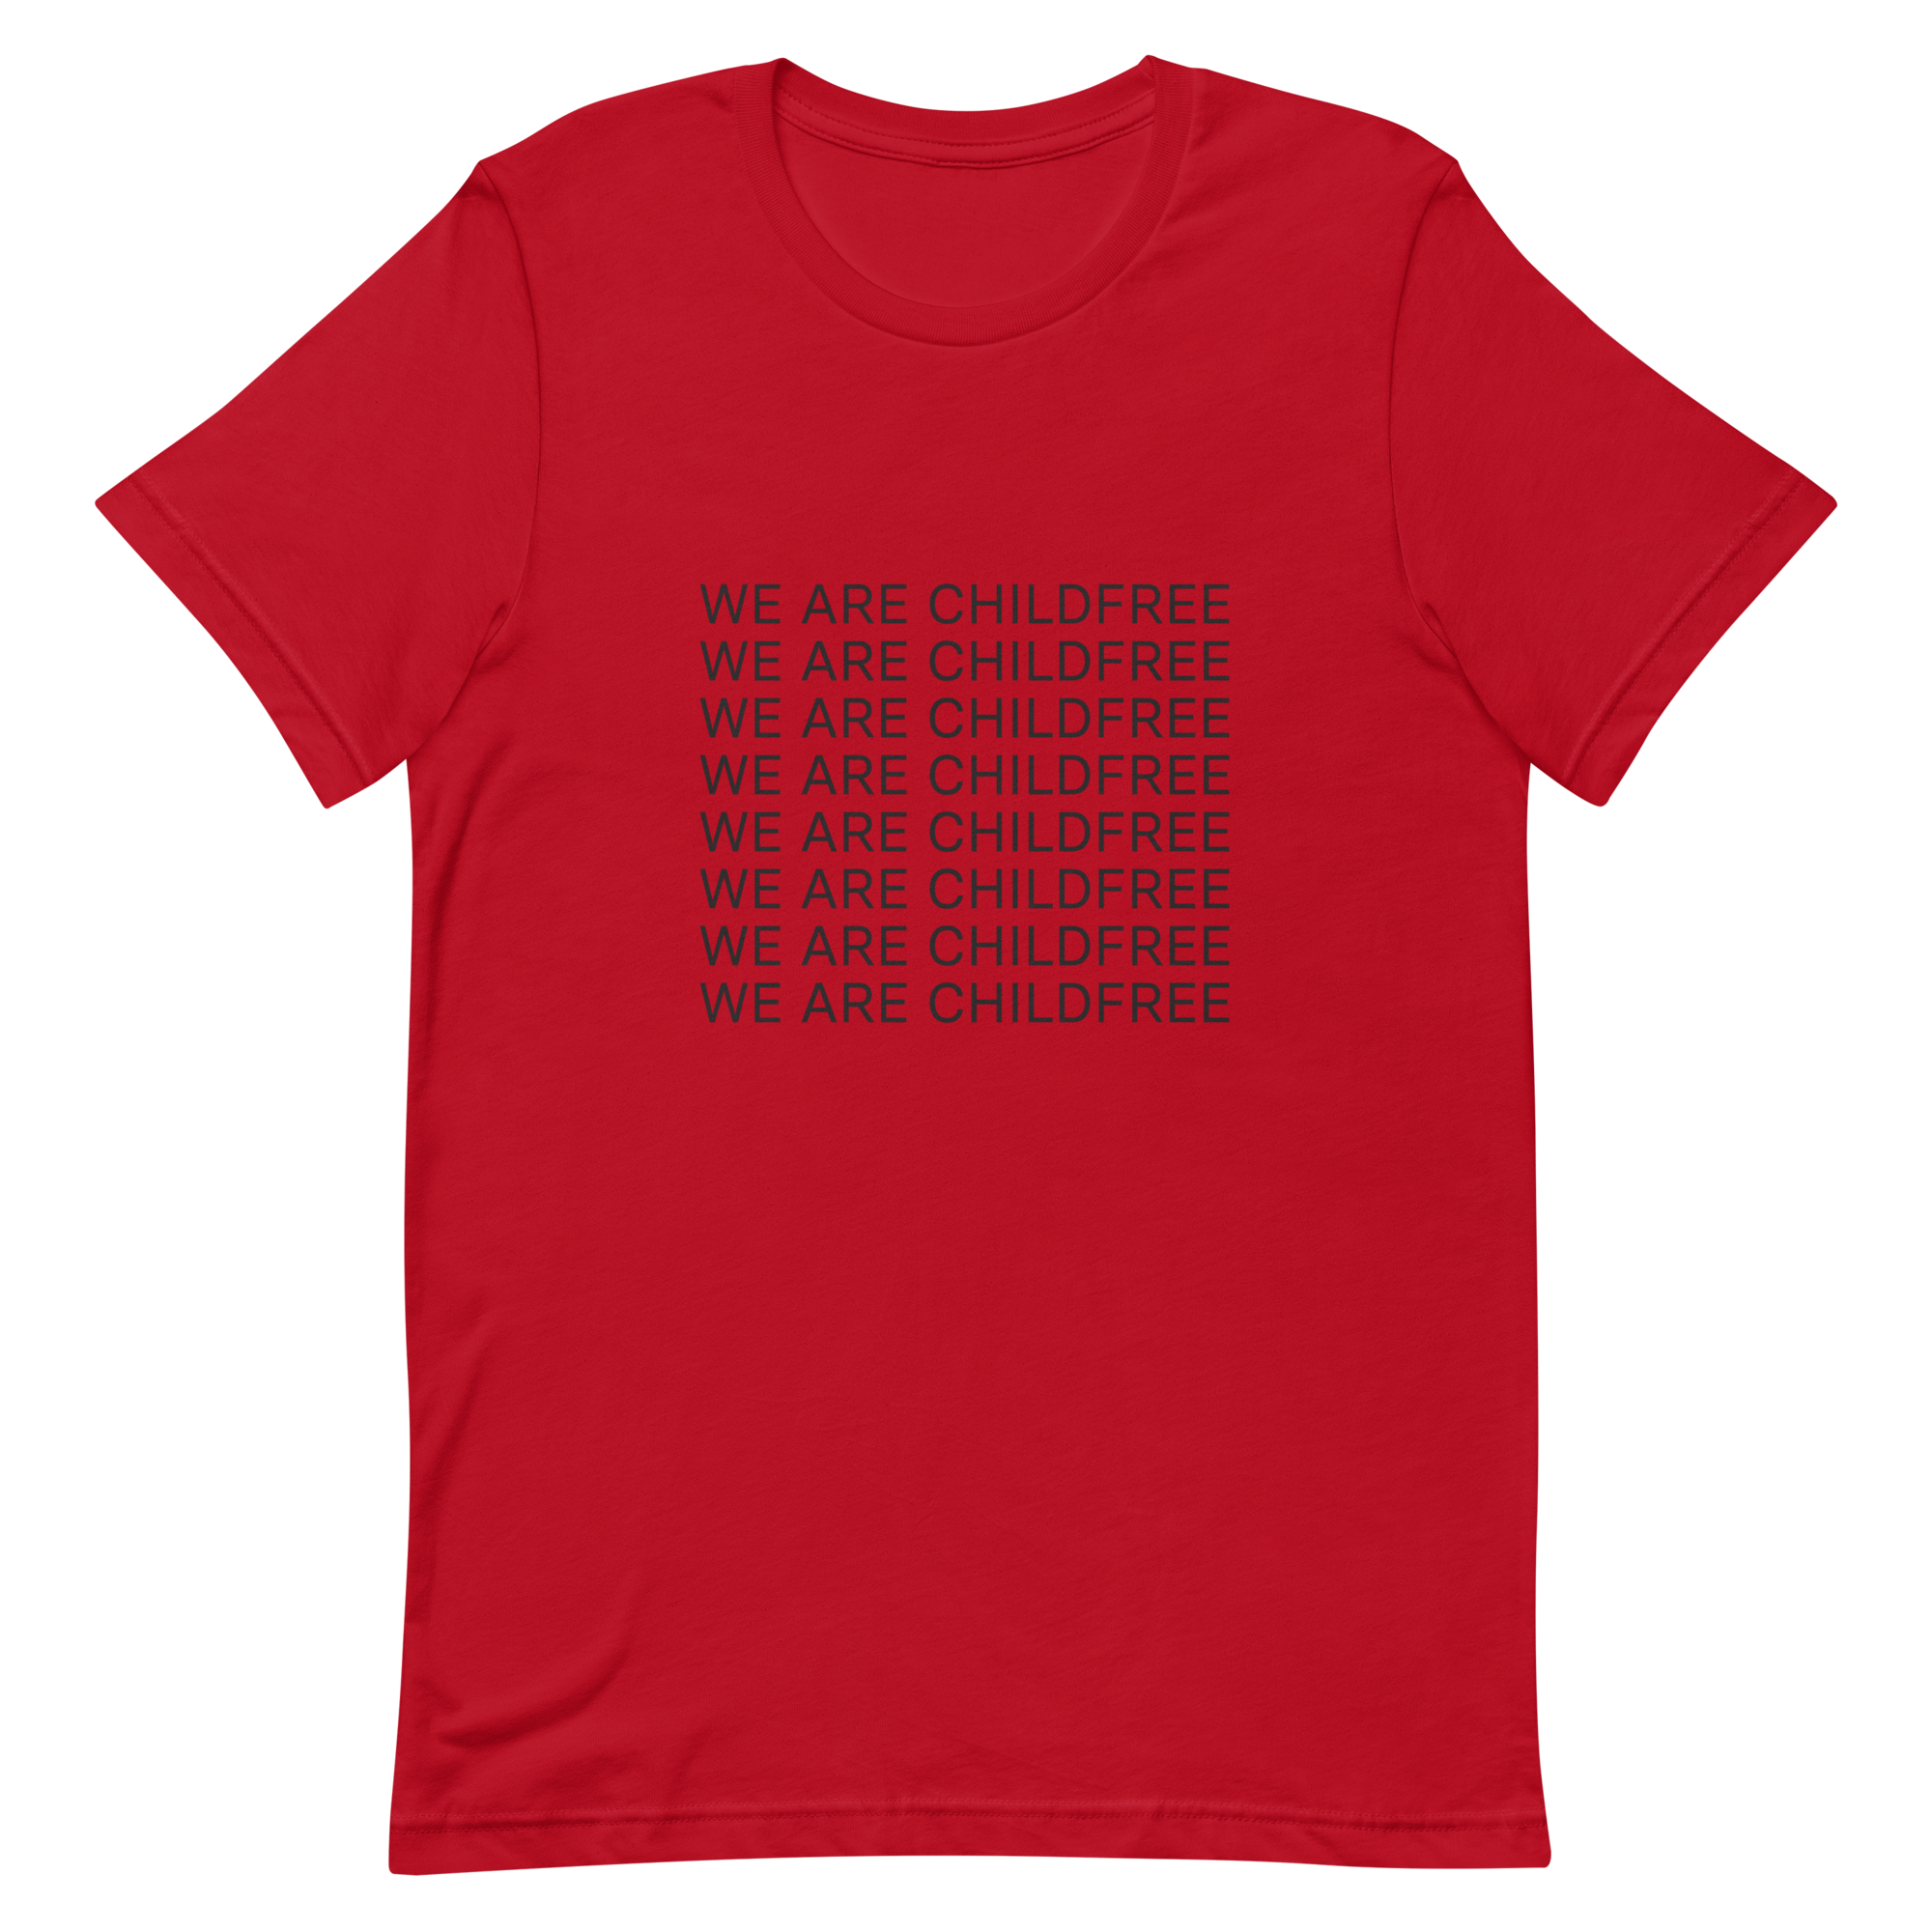 We are Childfree t-shirt red